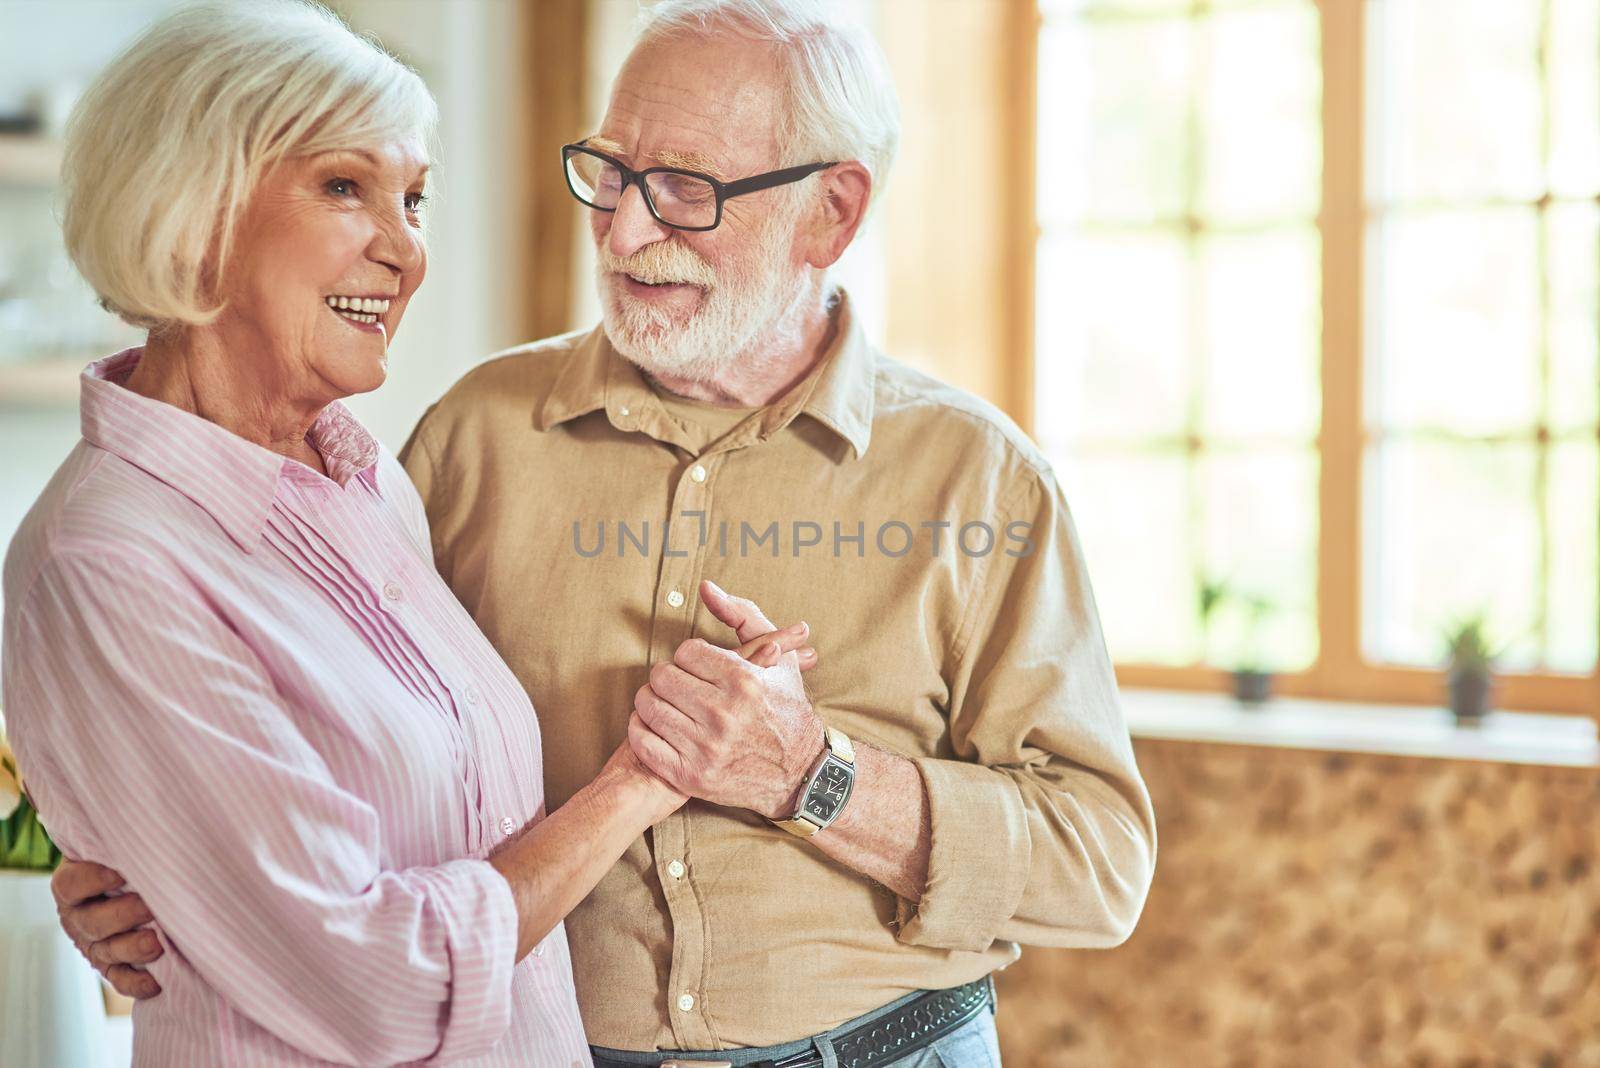 Smiling elderly couple enjoying time together in their house by friendsstock